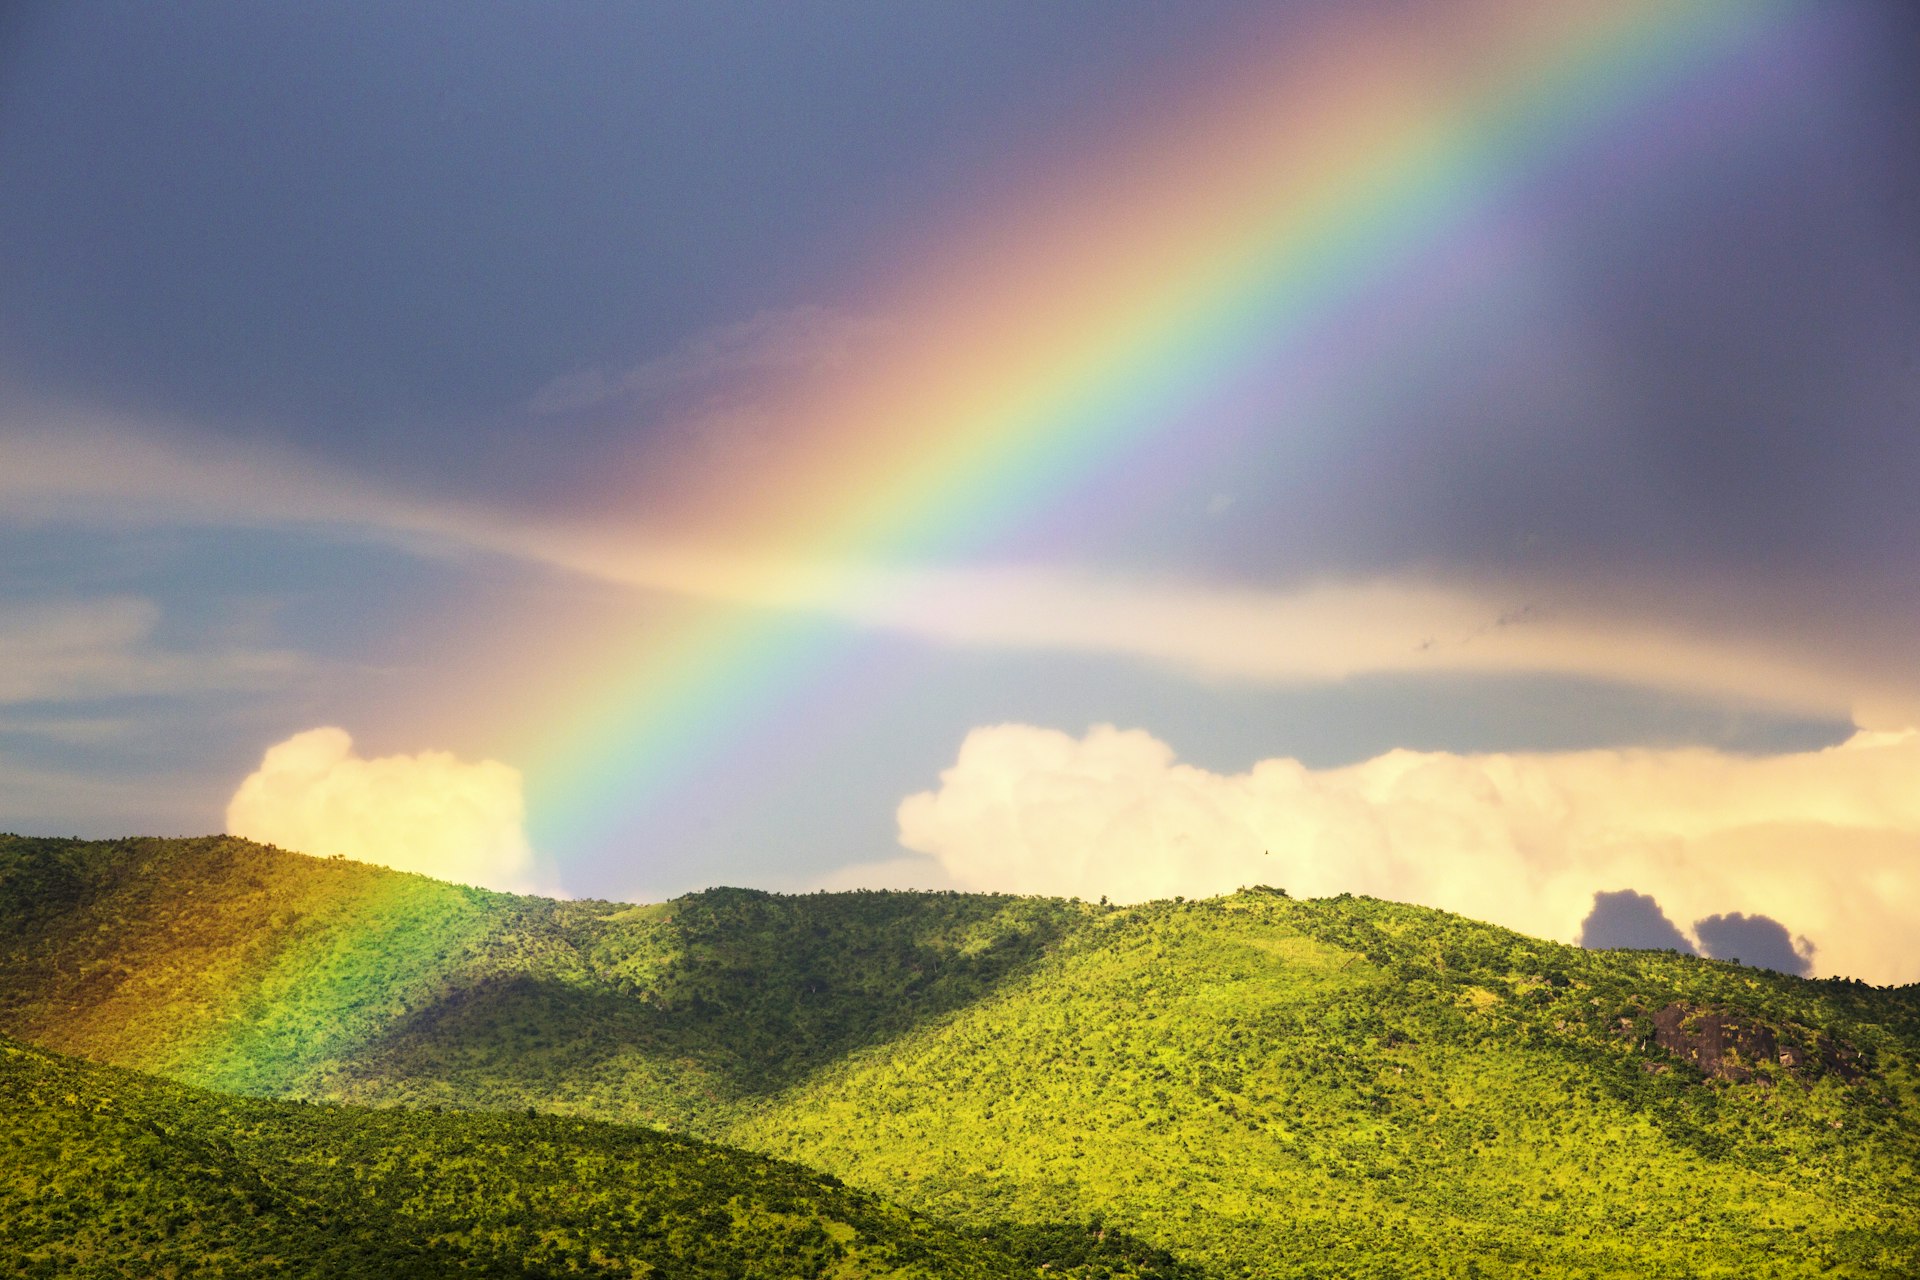 A rainbow in rainy season over the Shire Valley in southern Malawi